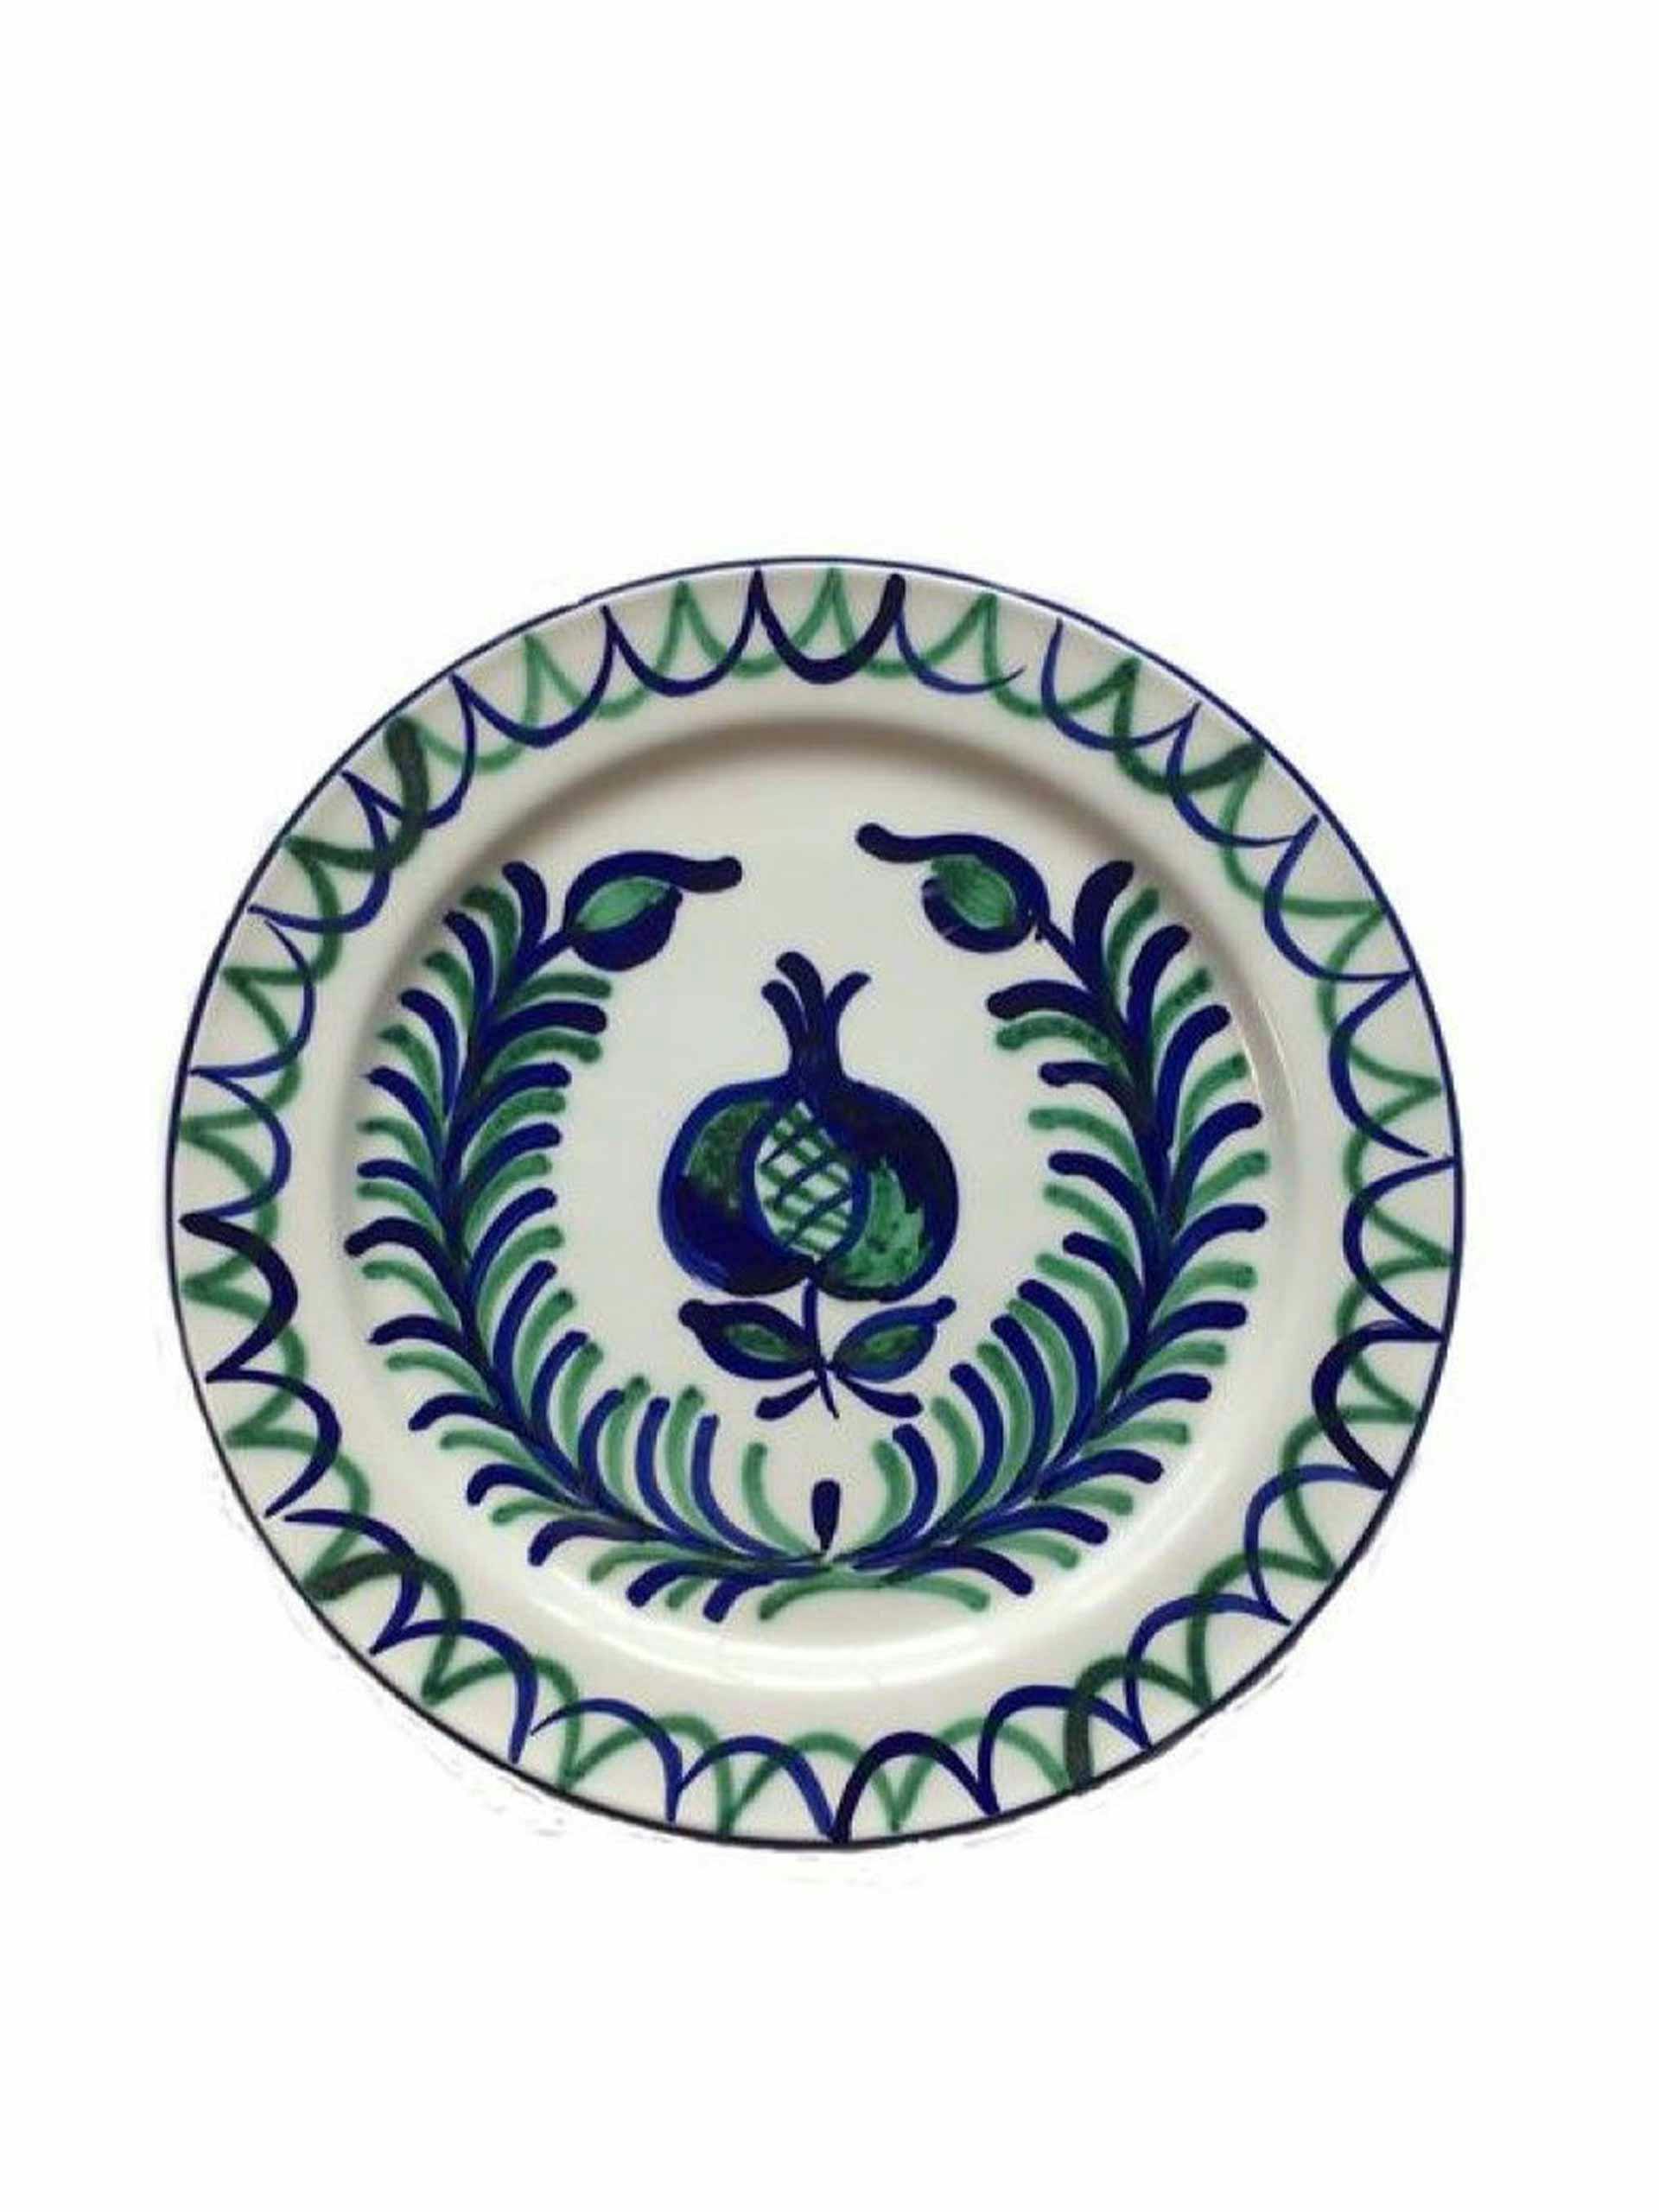 Blue and green ceramic plate